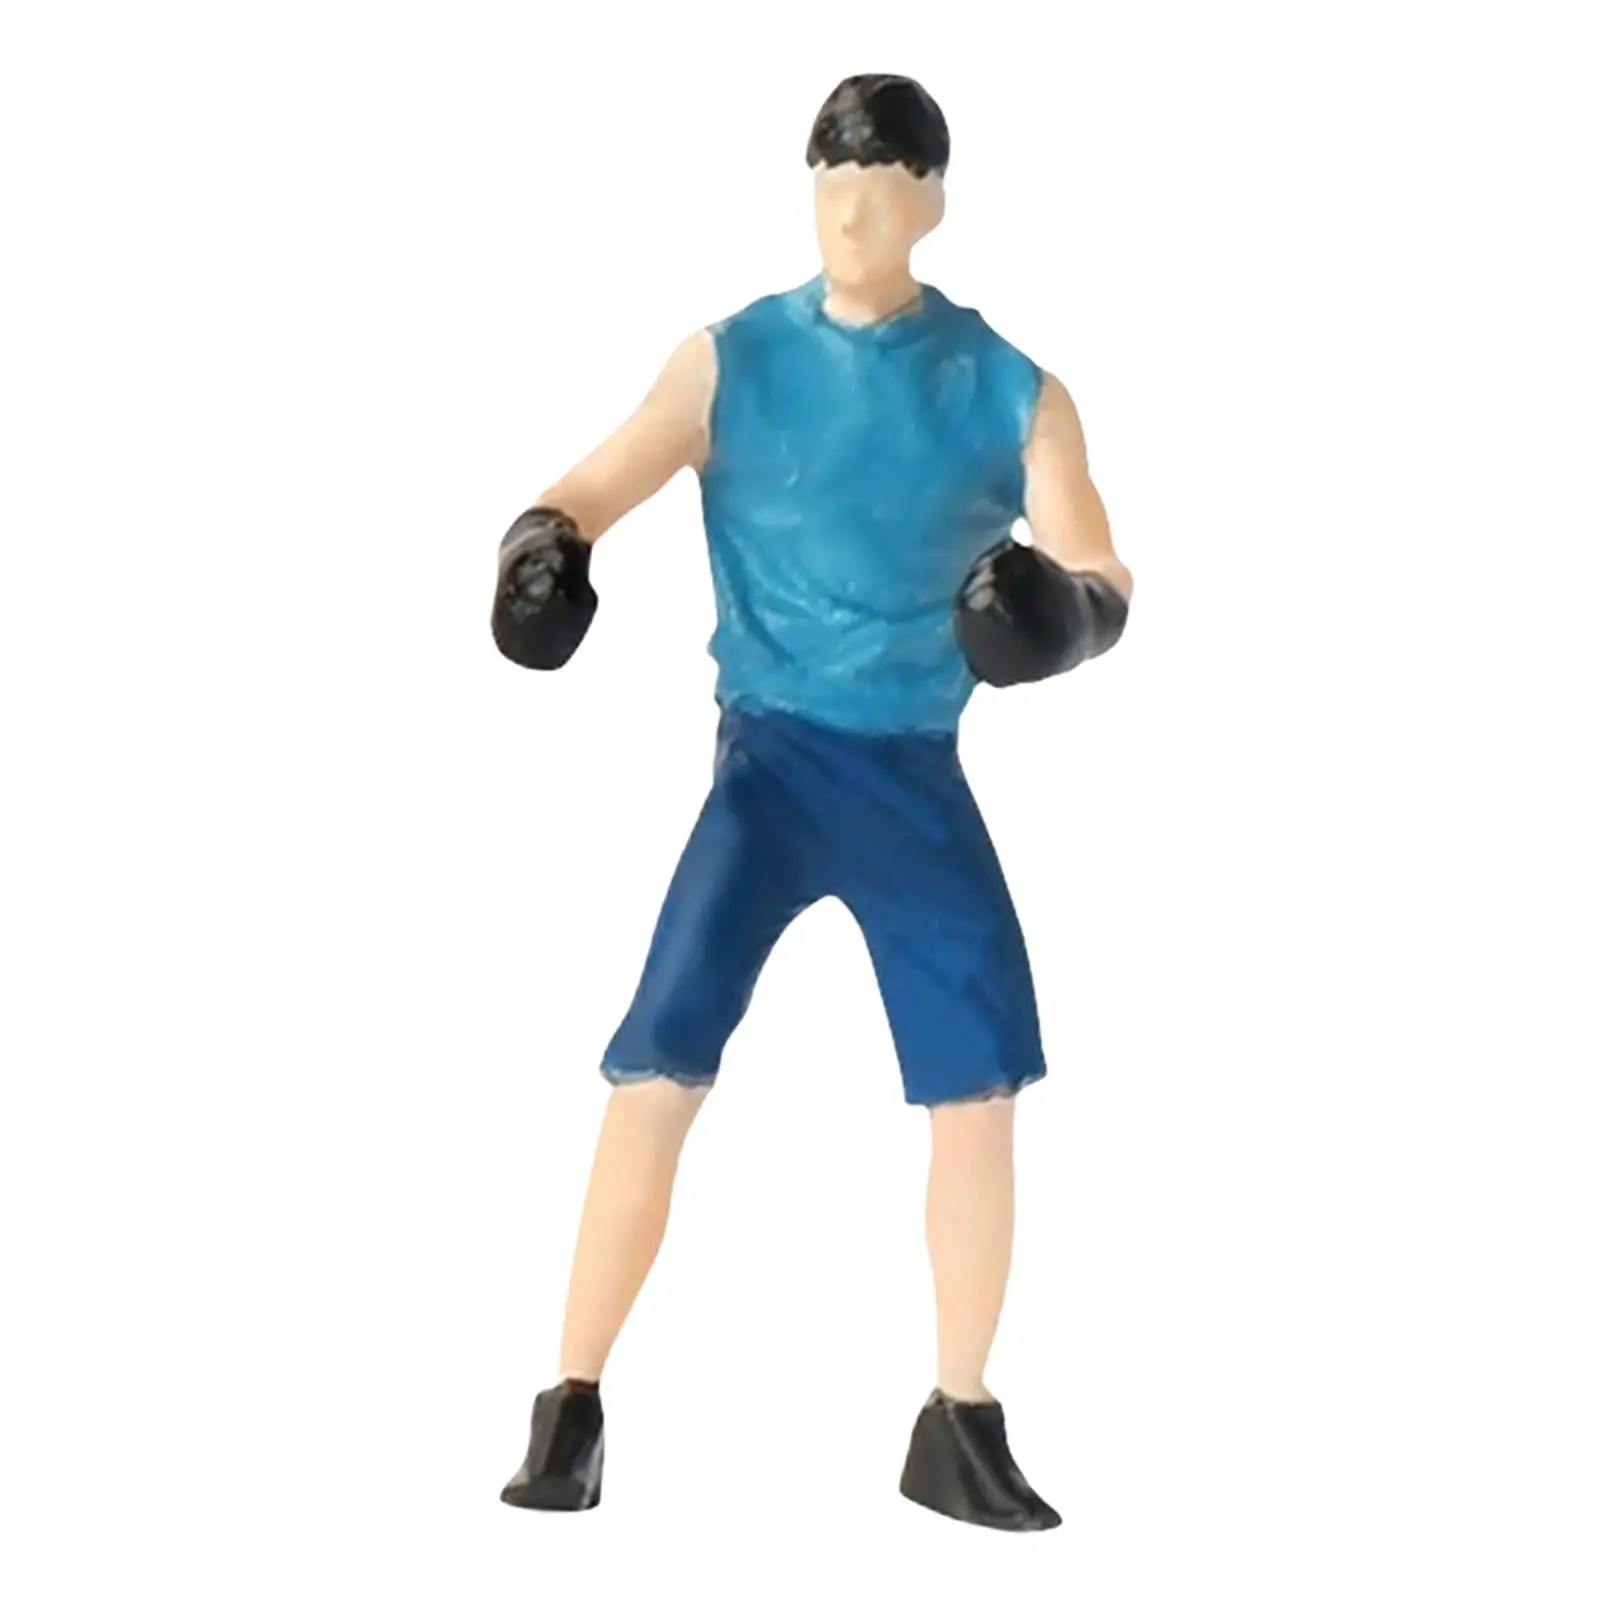 Hand Painted 1/64 Figures Boxing Man Figurines Resin Doll Tiny People Collectibles Ornament Realistic for Dollhouse Layout Decor